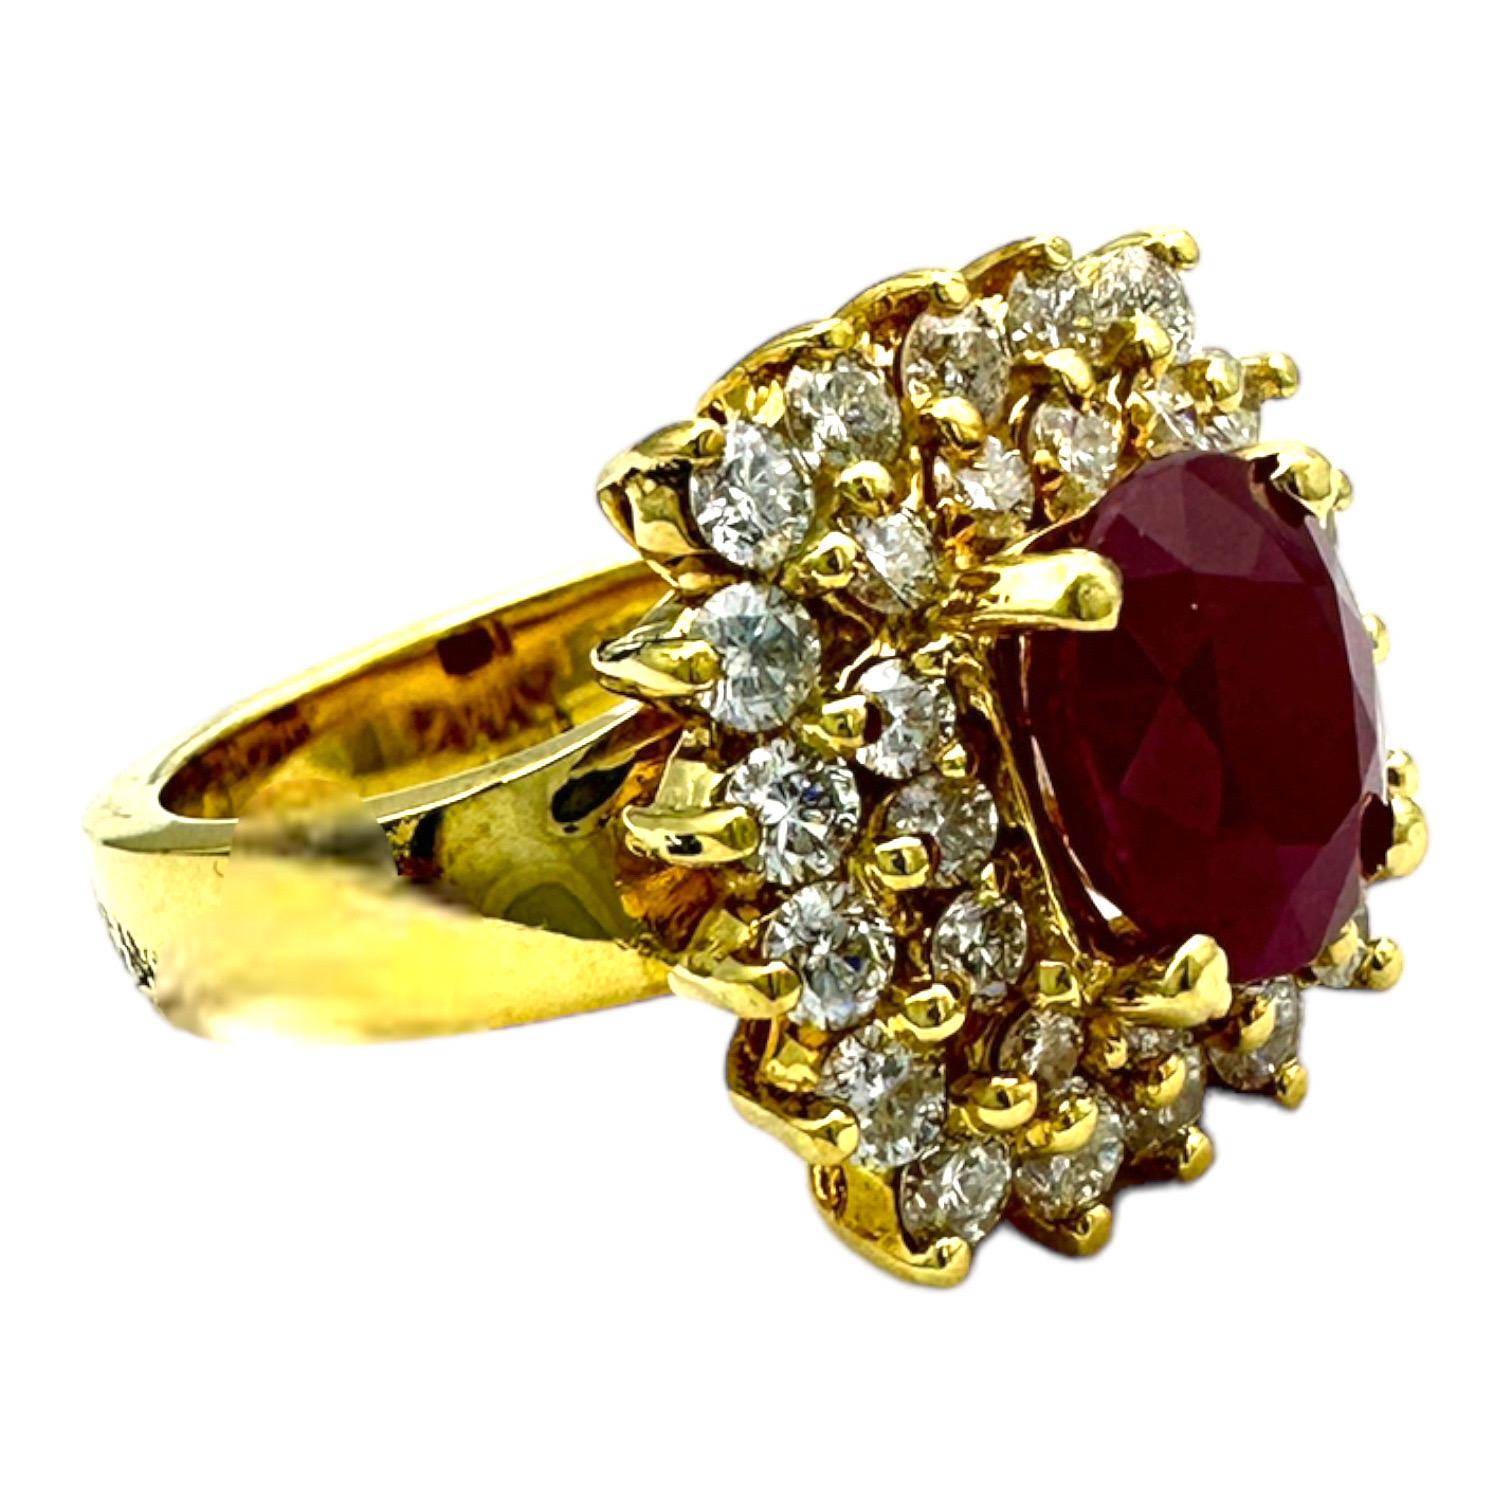 This captivating 18 karat yellow gold ring features a 2.10 karat Burma ruby surrounded by a striking diamond halo. The two outer halos surrounding the centrally-placed ruby create a timelessly elegant silhouette. Expertly crafted for lasting